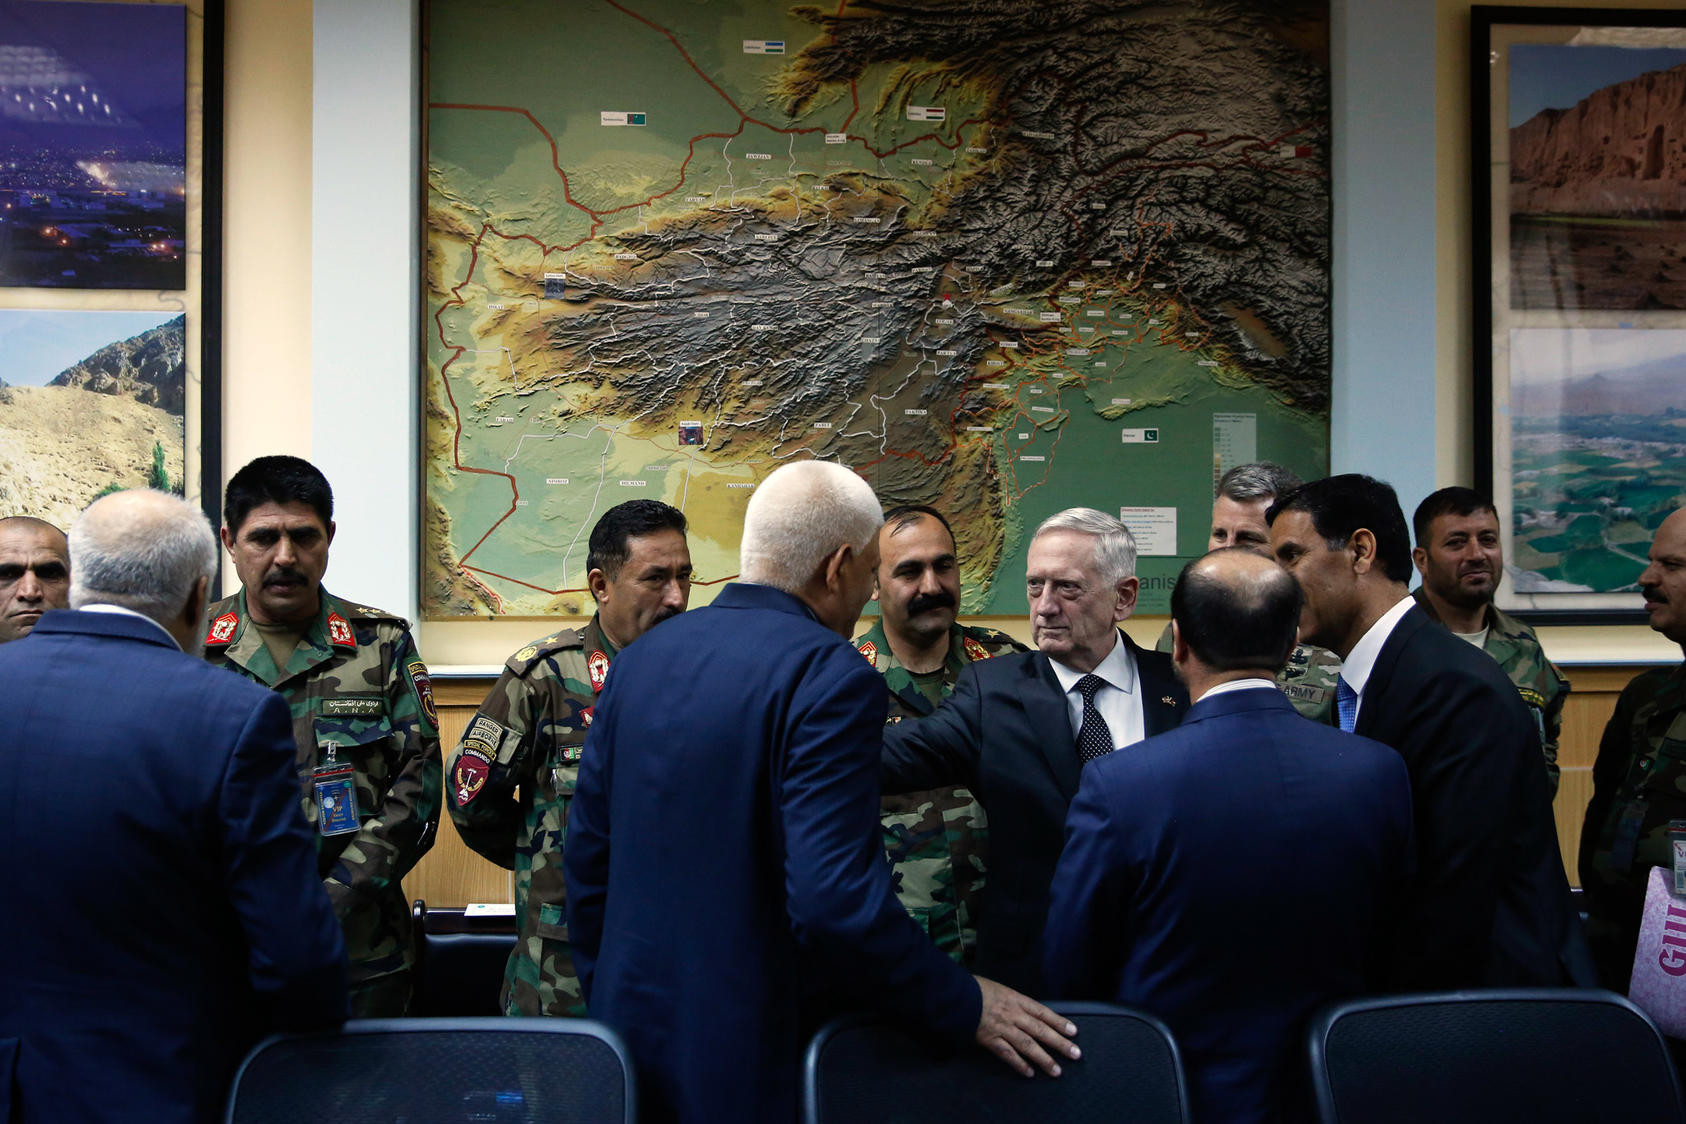 U.S. Defense Secretary James Mattis, center, meets with Afghan military leaders in Kabul, Afghanistan, April 24, 2017. As President Donald Trump decides whether to send thousands more troops to Afghanistan, his administration is divided along familiar fault lines, pitting two generals, Mattis and Lt. Gen. H.R. McMaster, against political aides. (Johnathan Ernst/Pool via The New York Times)